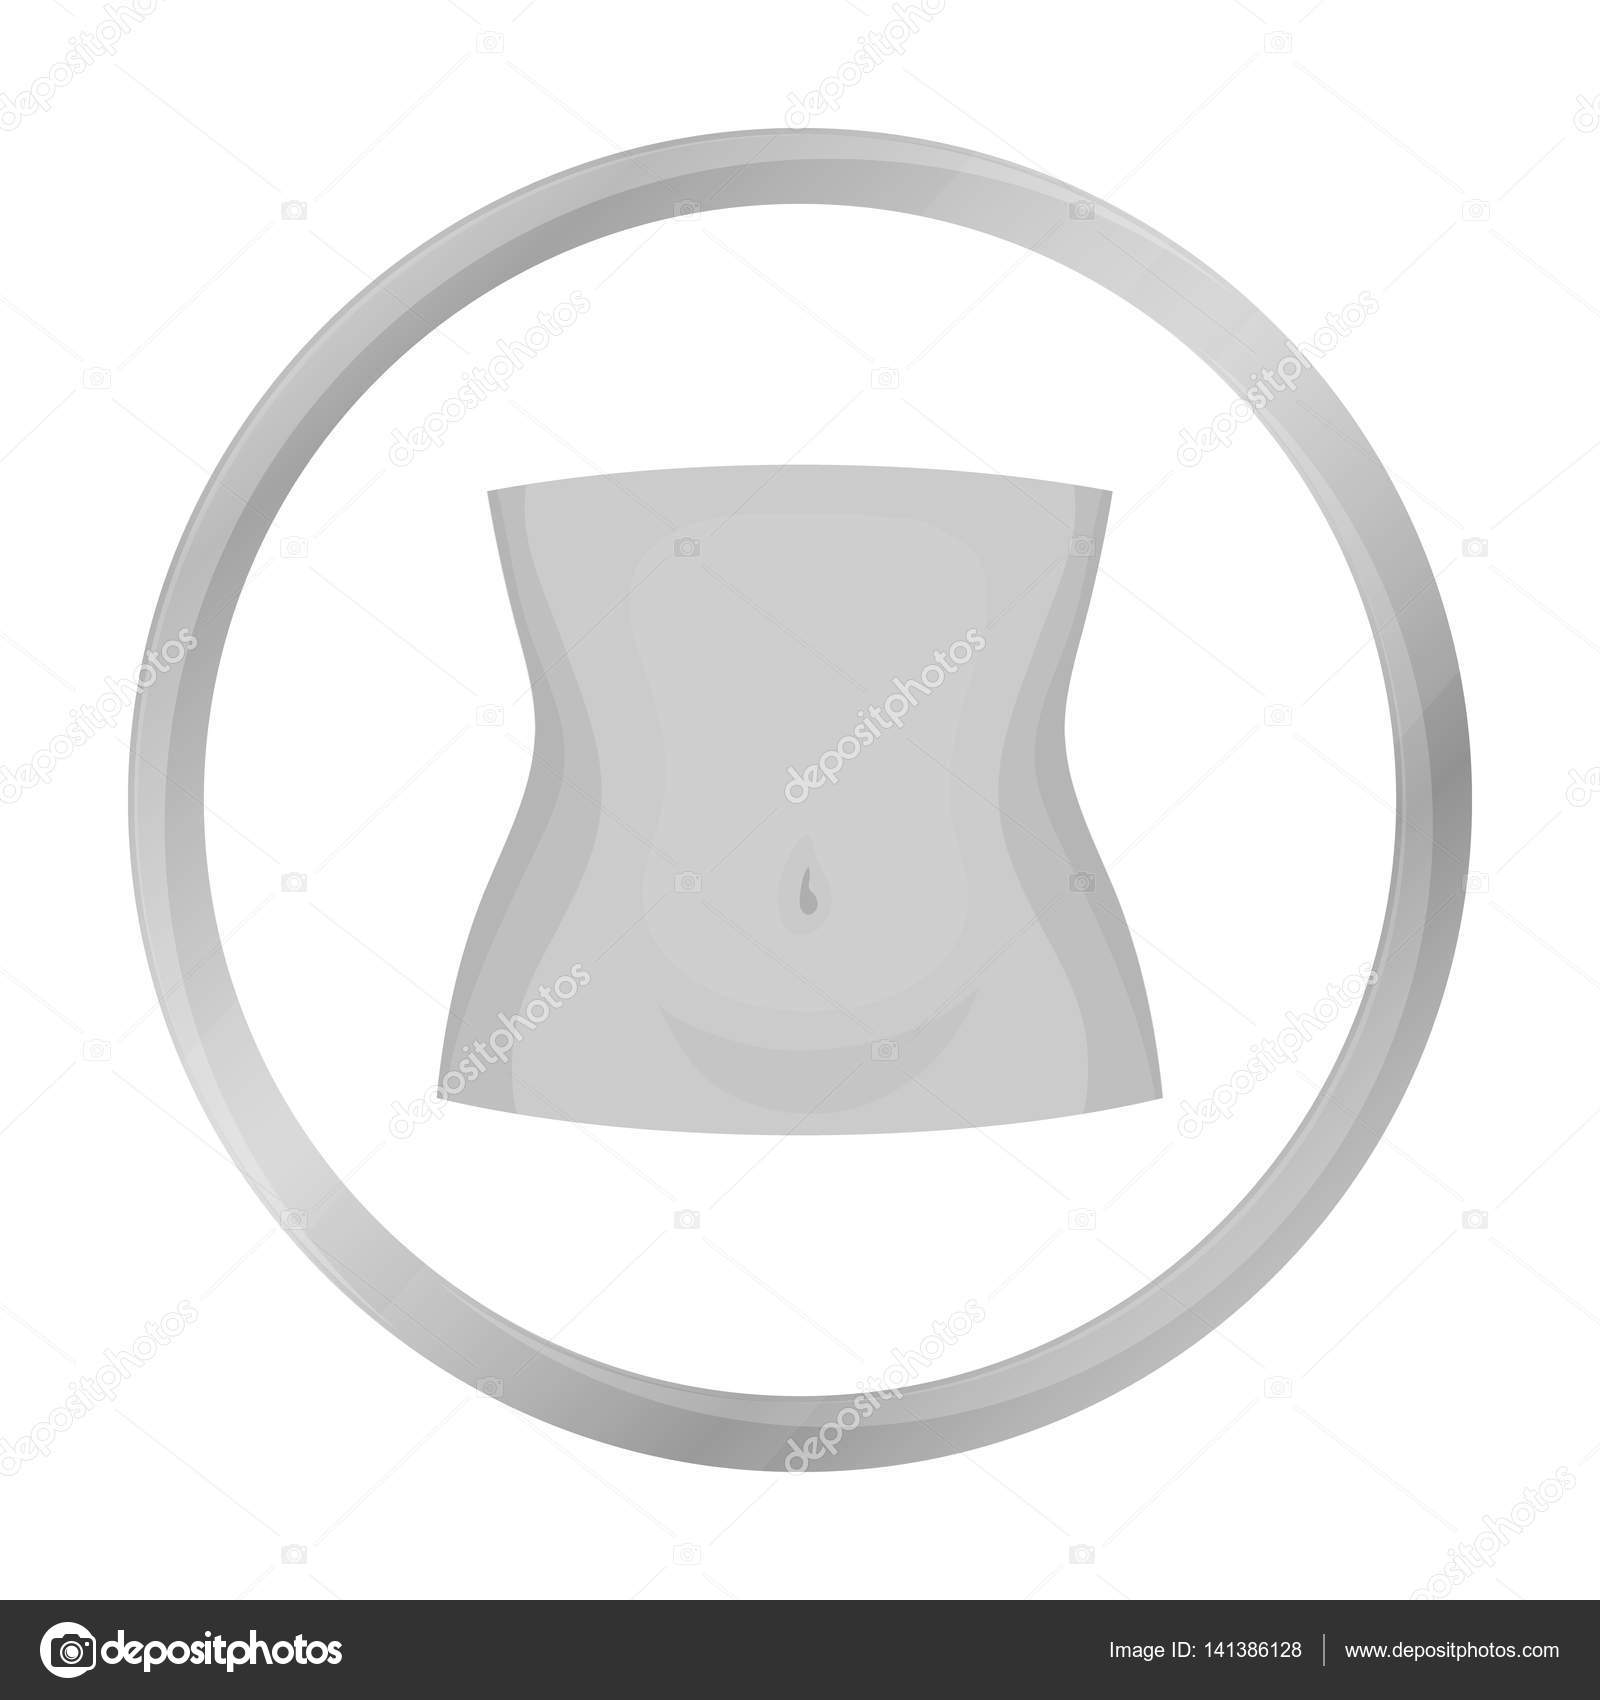 Abdomen Icon In Flat Style Isolated On White Background. Part 